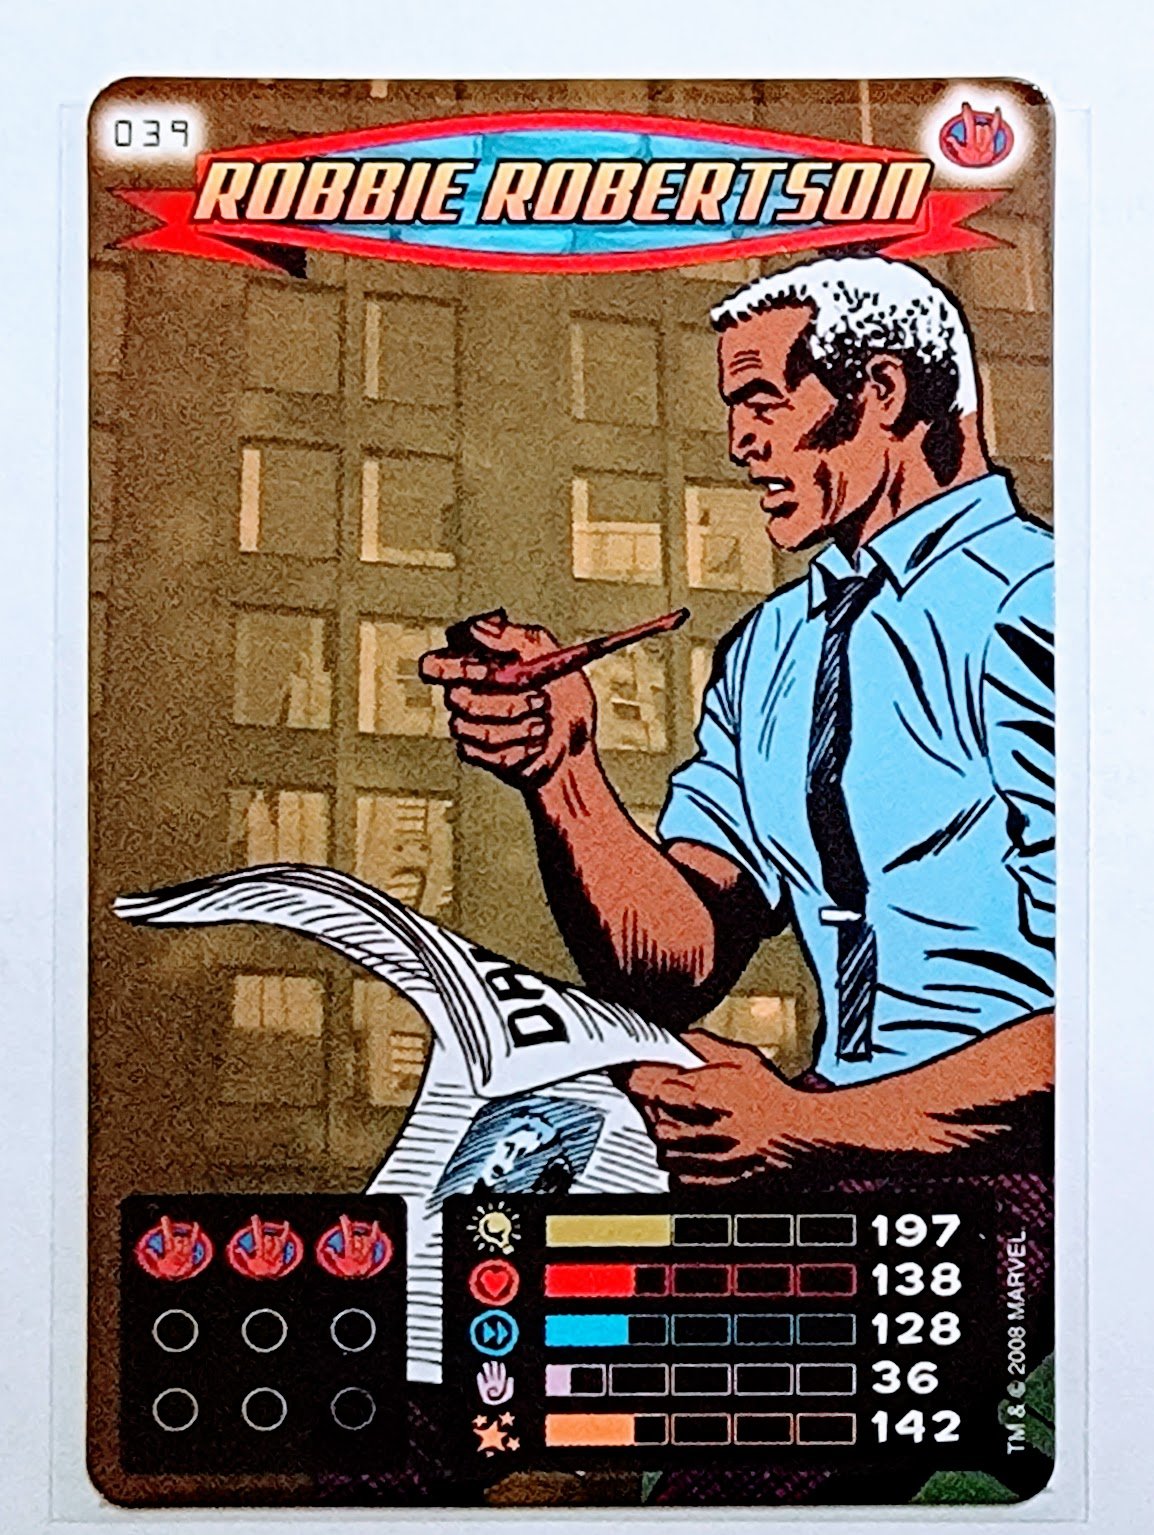 2008 Spiderman Heroes and Villains Robbie Robertson #039 Marvel Booster Trading Card UPTI simple Xclusive Collectibles   